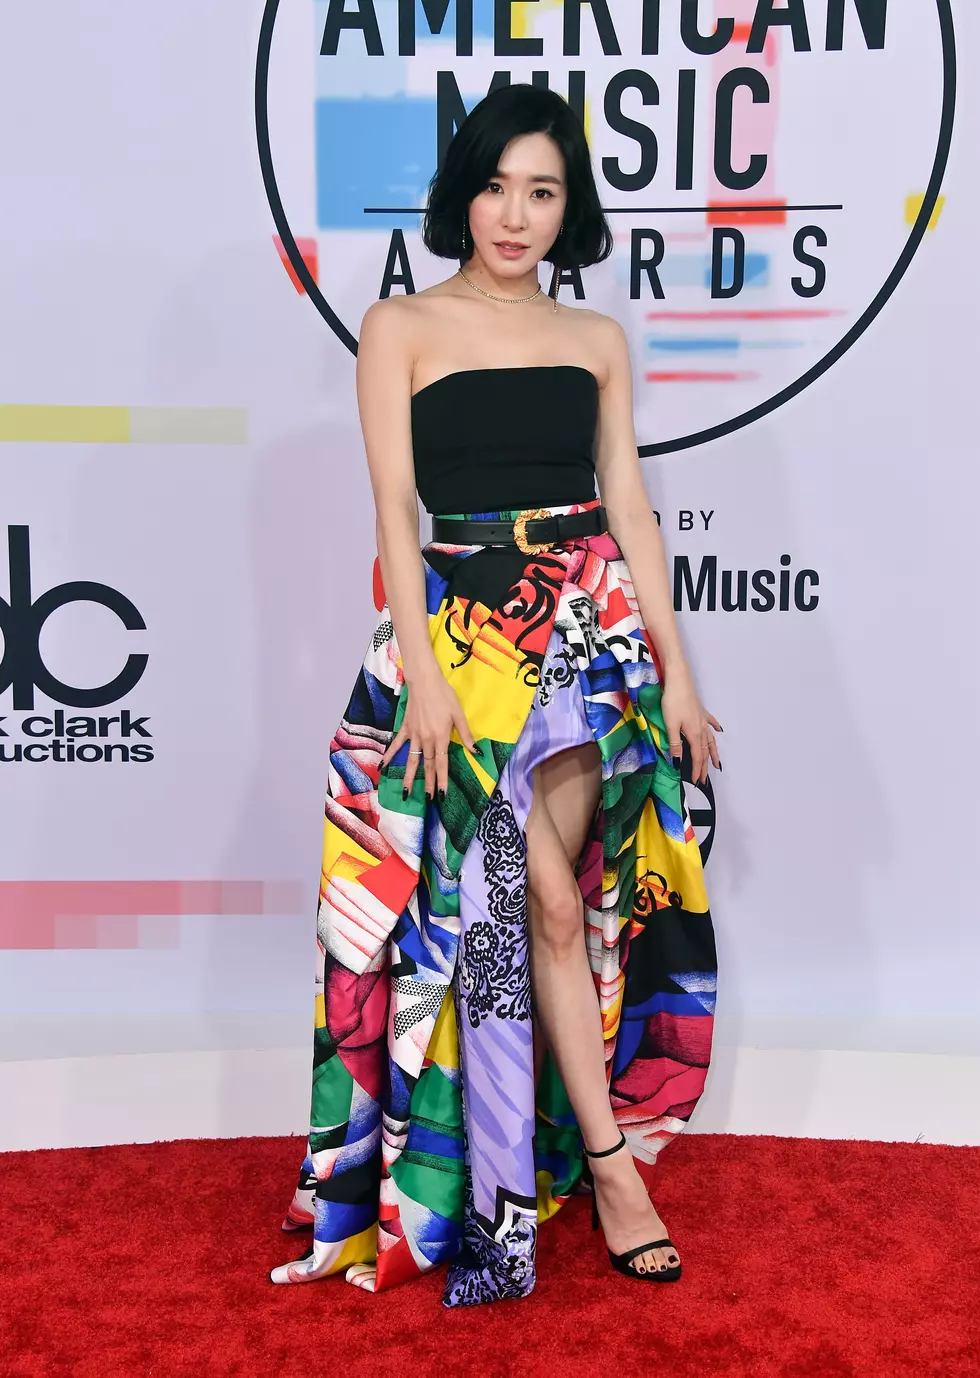 Tiffany Young, NCT 127, & Kris Wu hit the red carpet at the 'AMAs